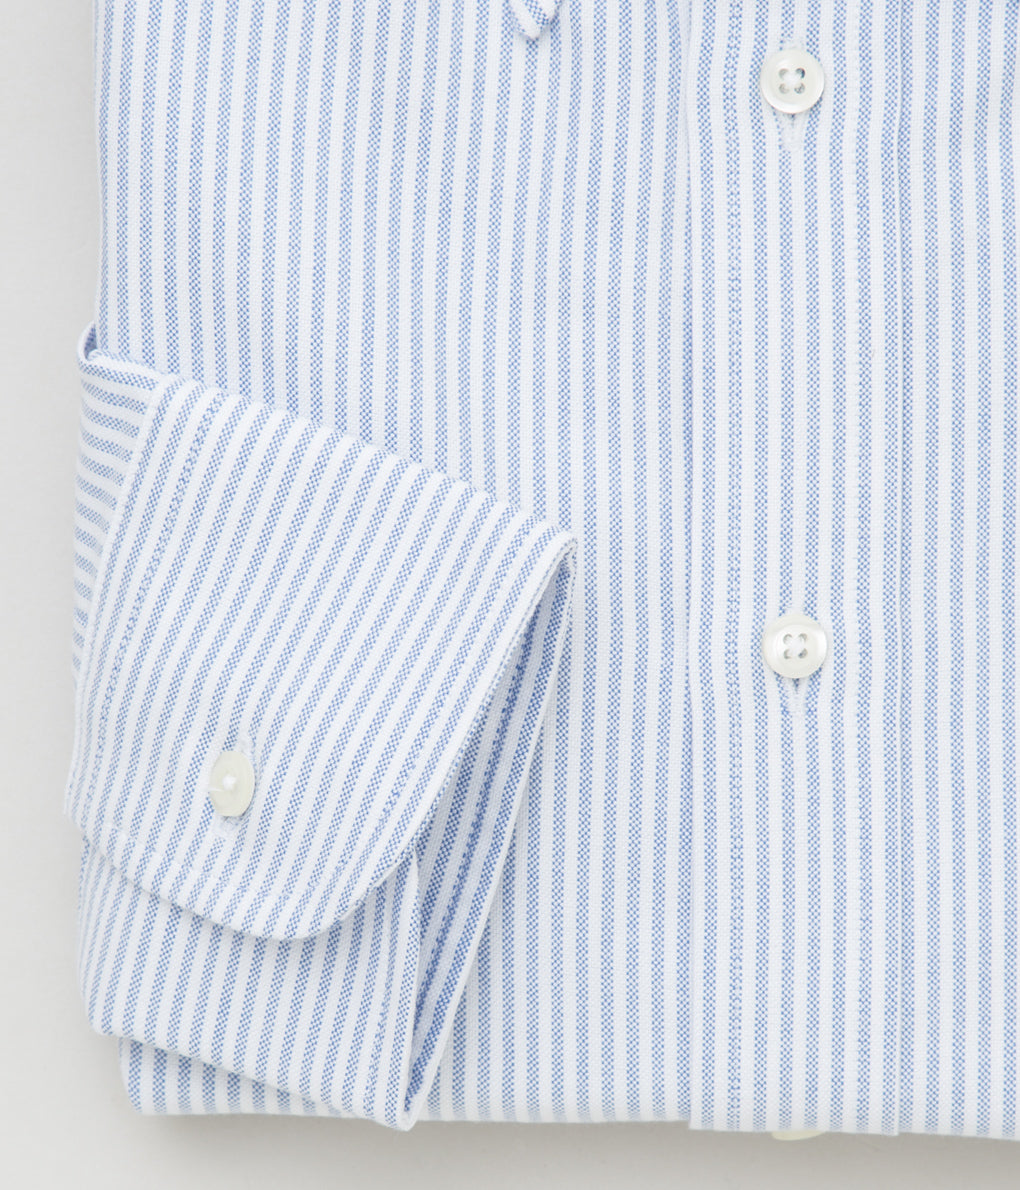 INDIVIDUALIZED SHIRTS "CANDY STRIPE (CLASSIC FIT BUTTON DOWN SHIRT)" (LIGHT BLUE)